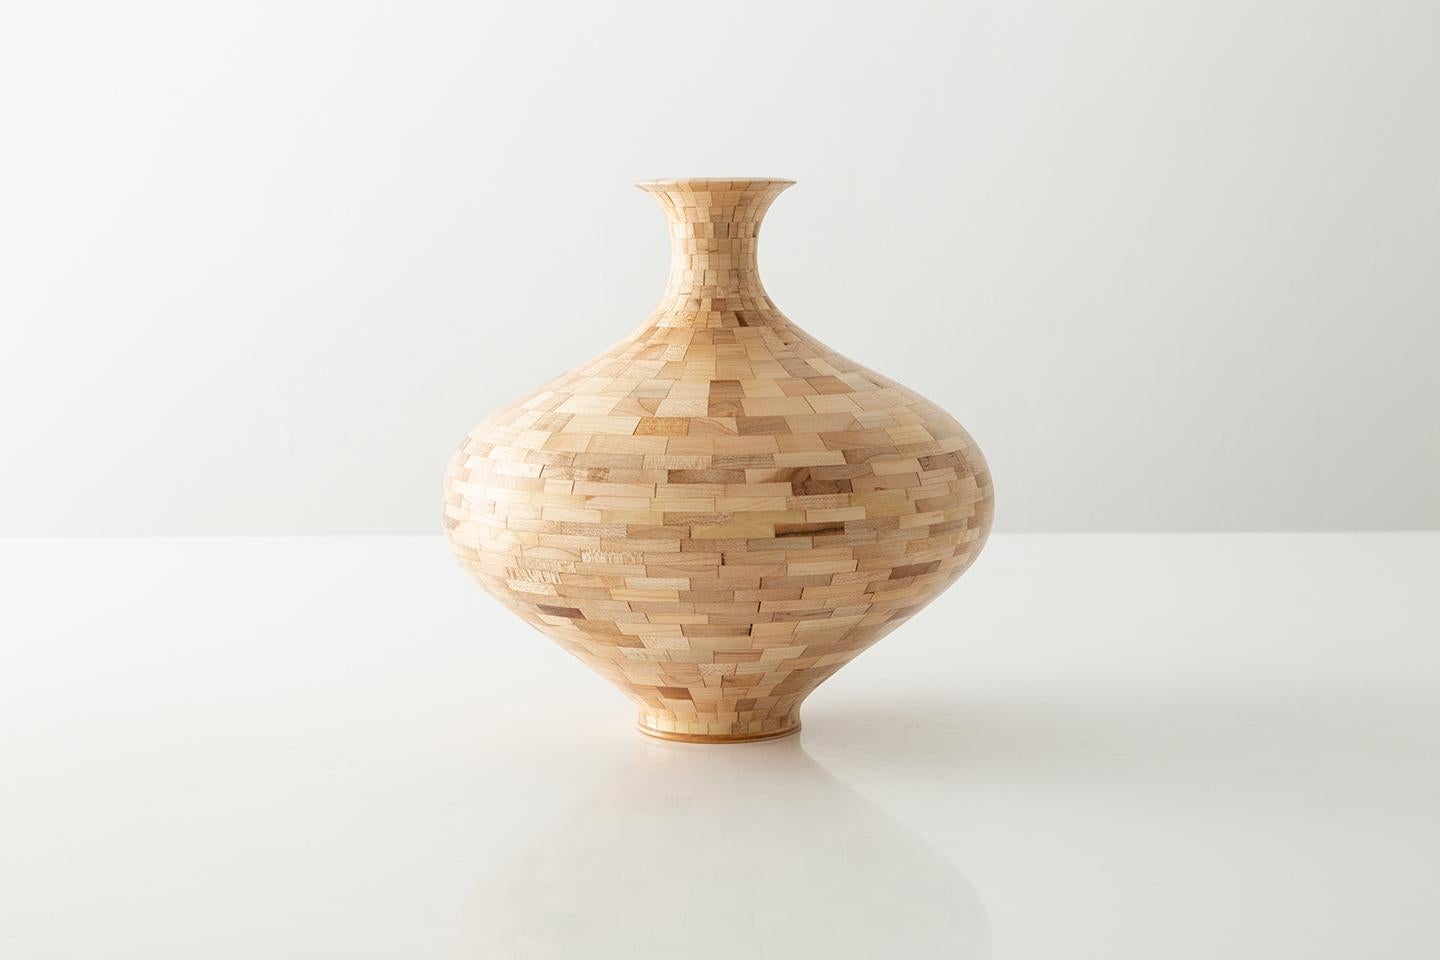 Part of Richard Haining's STACKED Collection, this spherical vase is made from reclaimed maple. The salvaged wood offcuts were sourced from a variety of local Brooklyn wood shops. The salvaged wood's natural coloring shows off tones ranging from